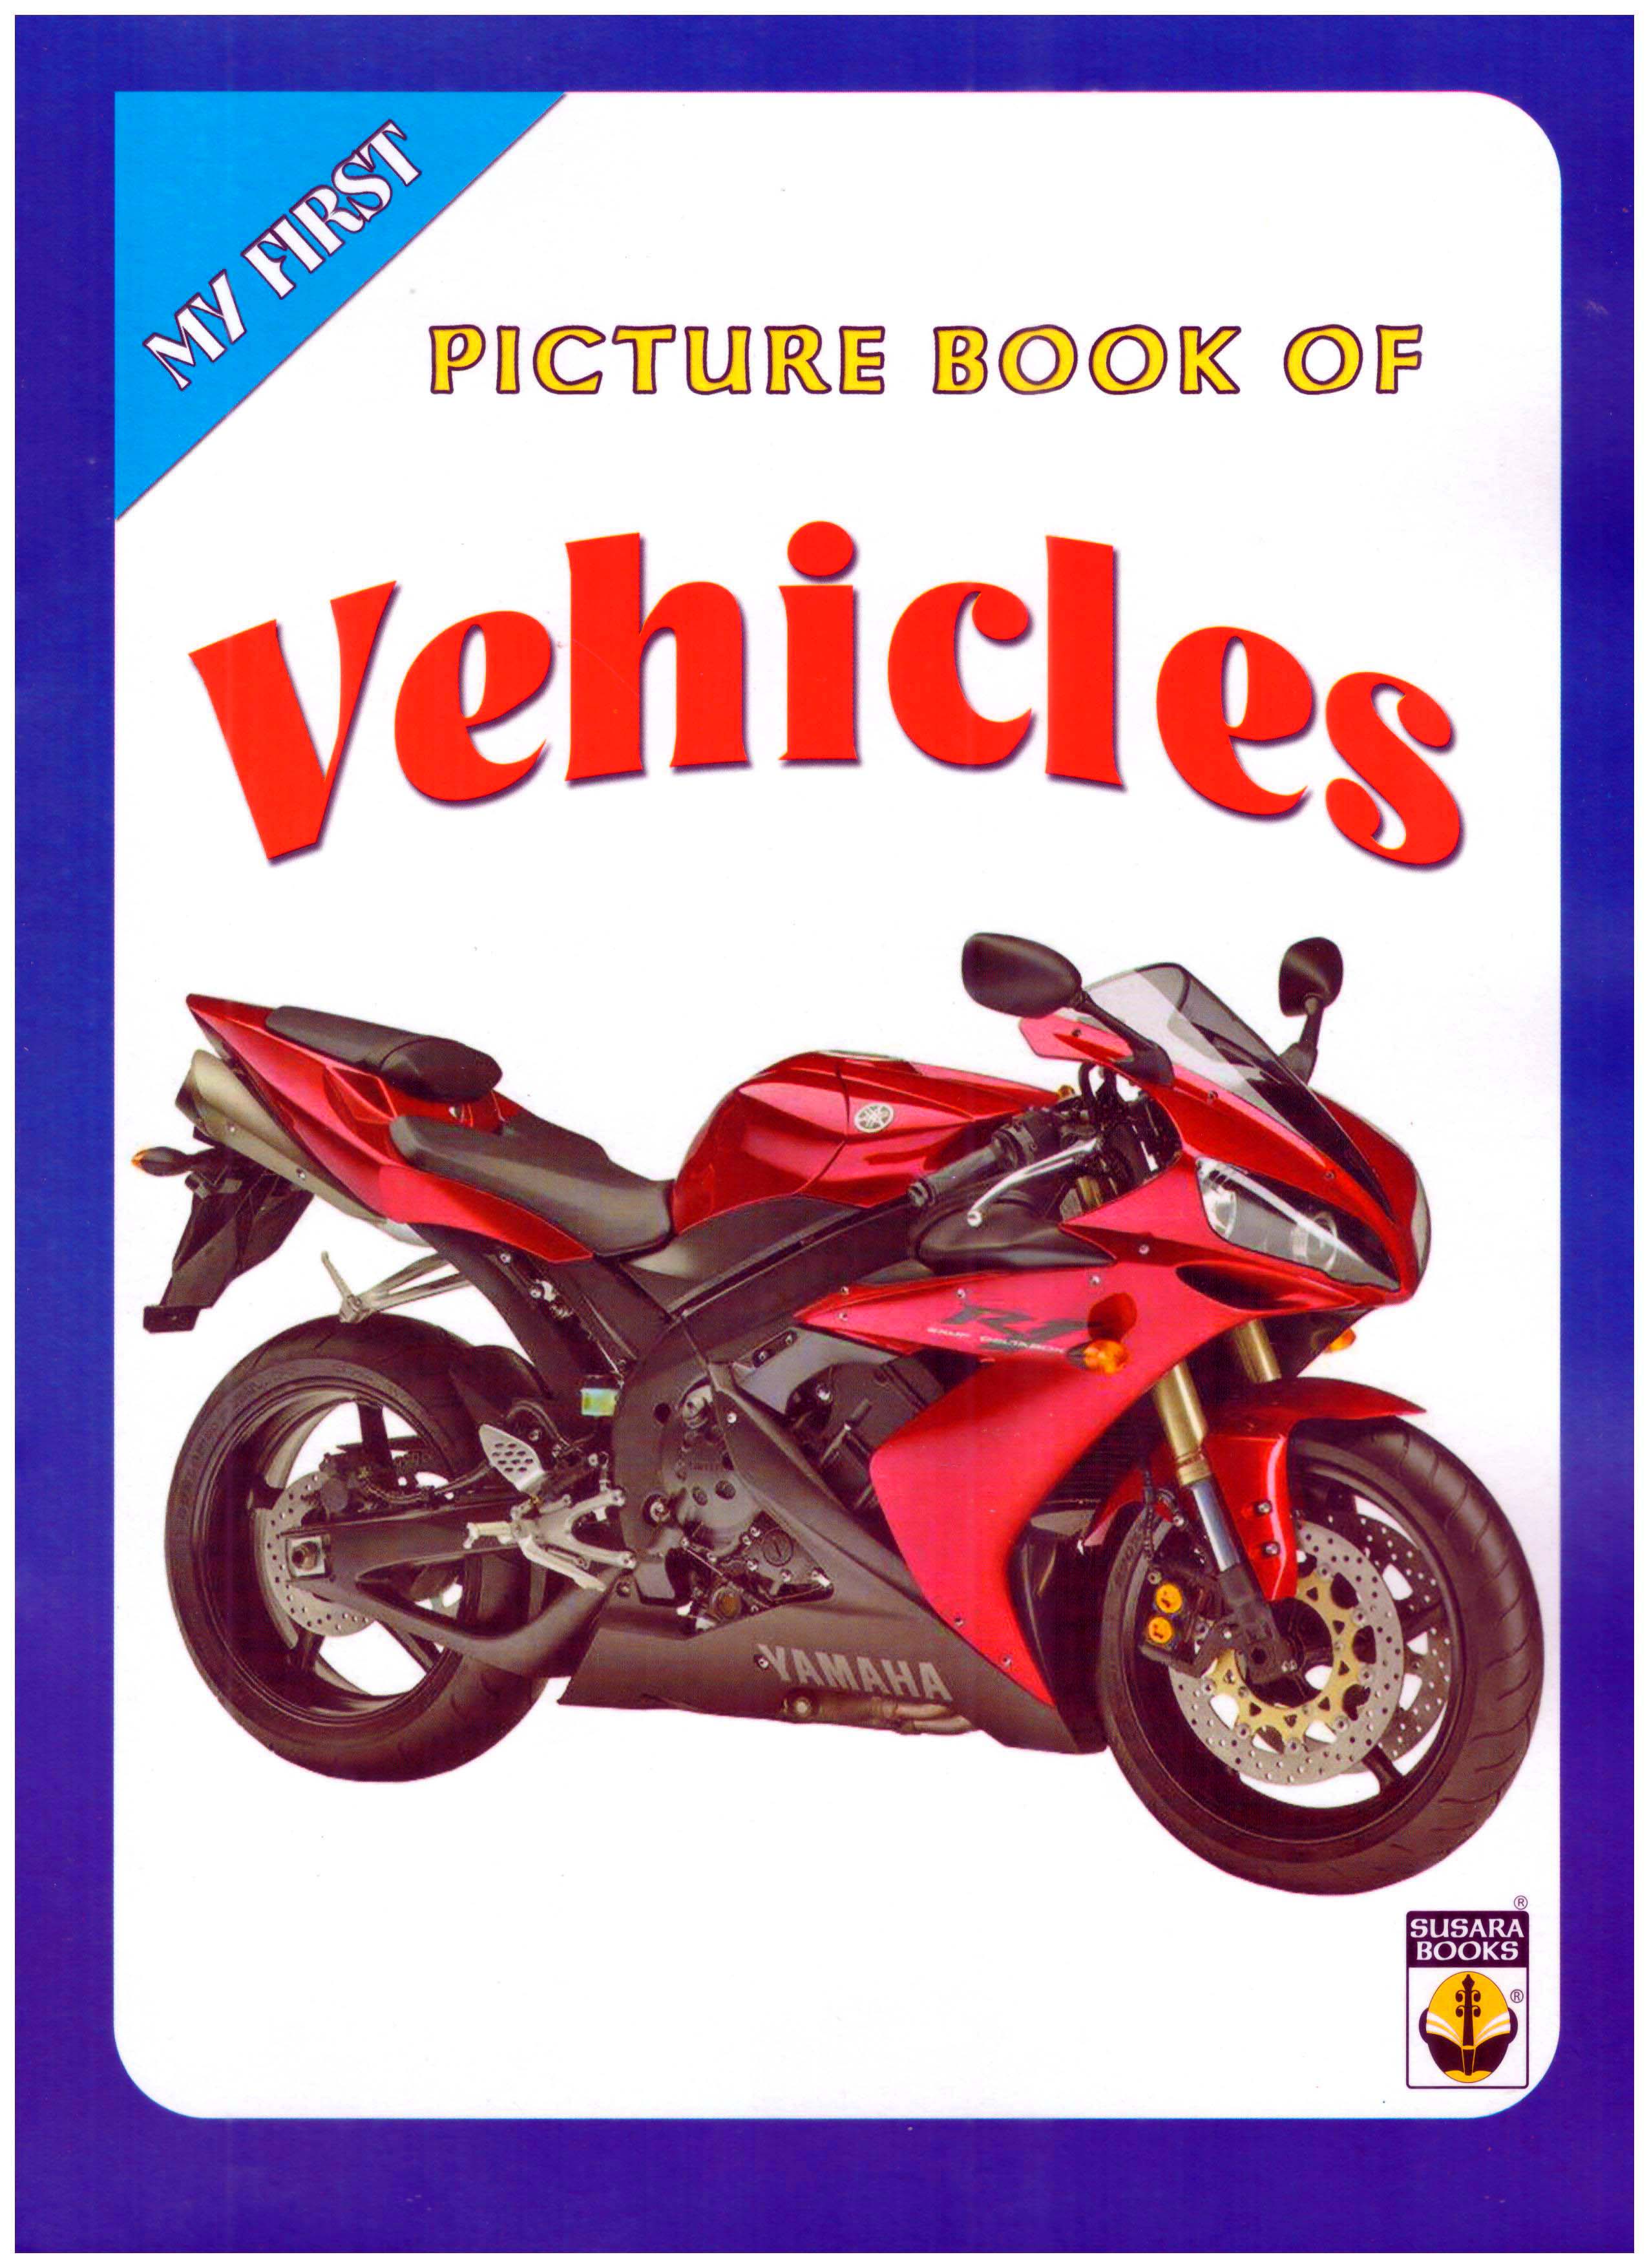 My First Picture Book of Vehicles